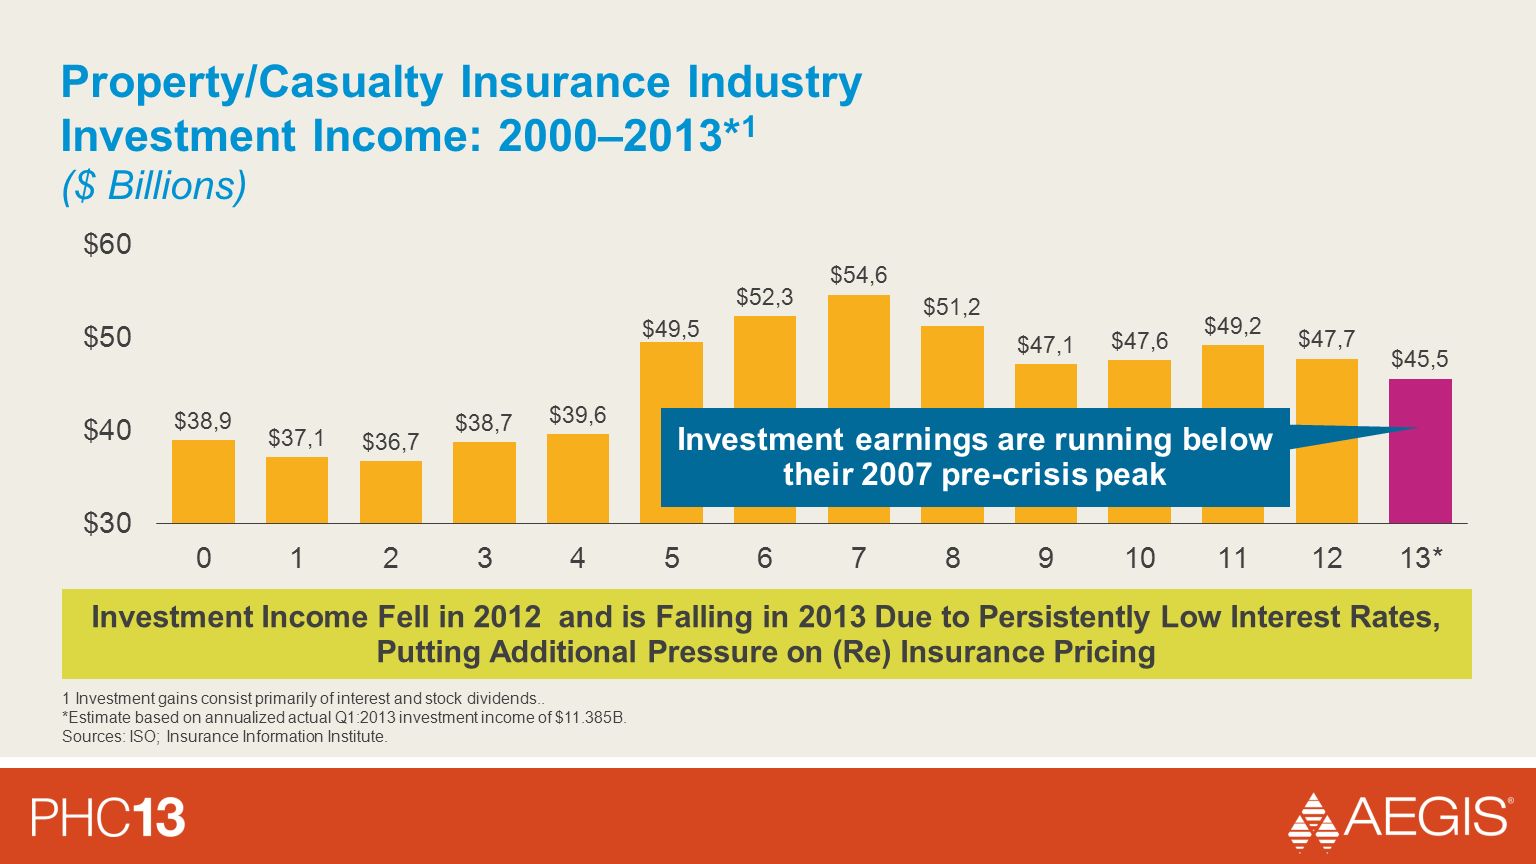 Property/Casualty Insurance Industry Investment Income: 2000–2013* 1 Investment earnings are running below their 2007 pre-crisis peak 1 Investment gains consist primarily of interest and stock dividends..